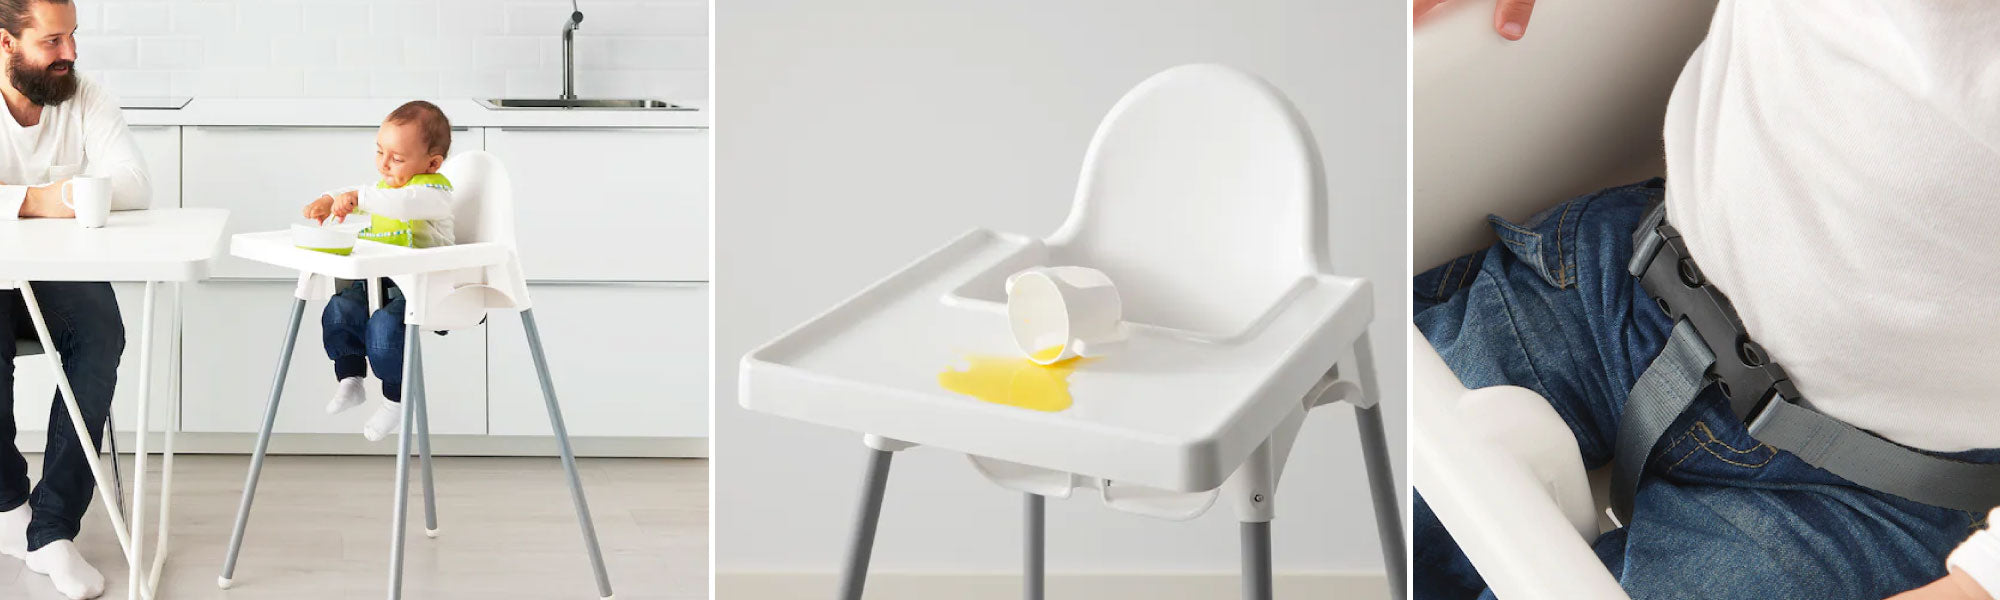 Baby Furniture - high chairs - Ikea Antilop